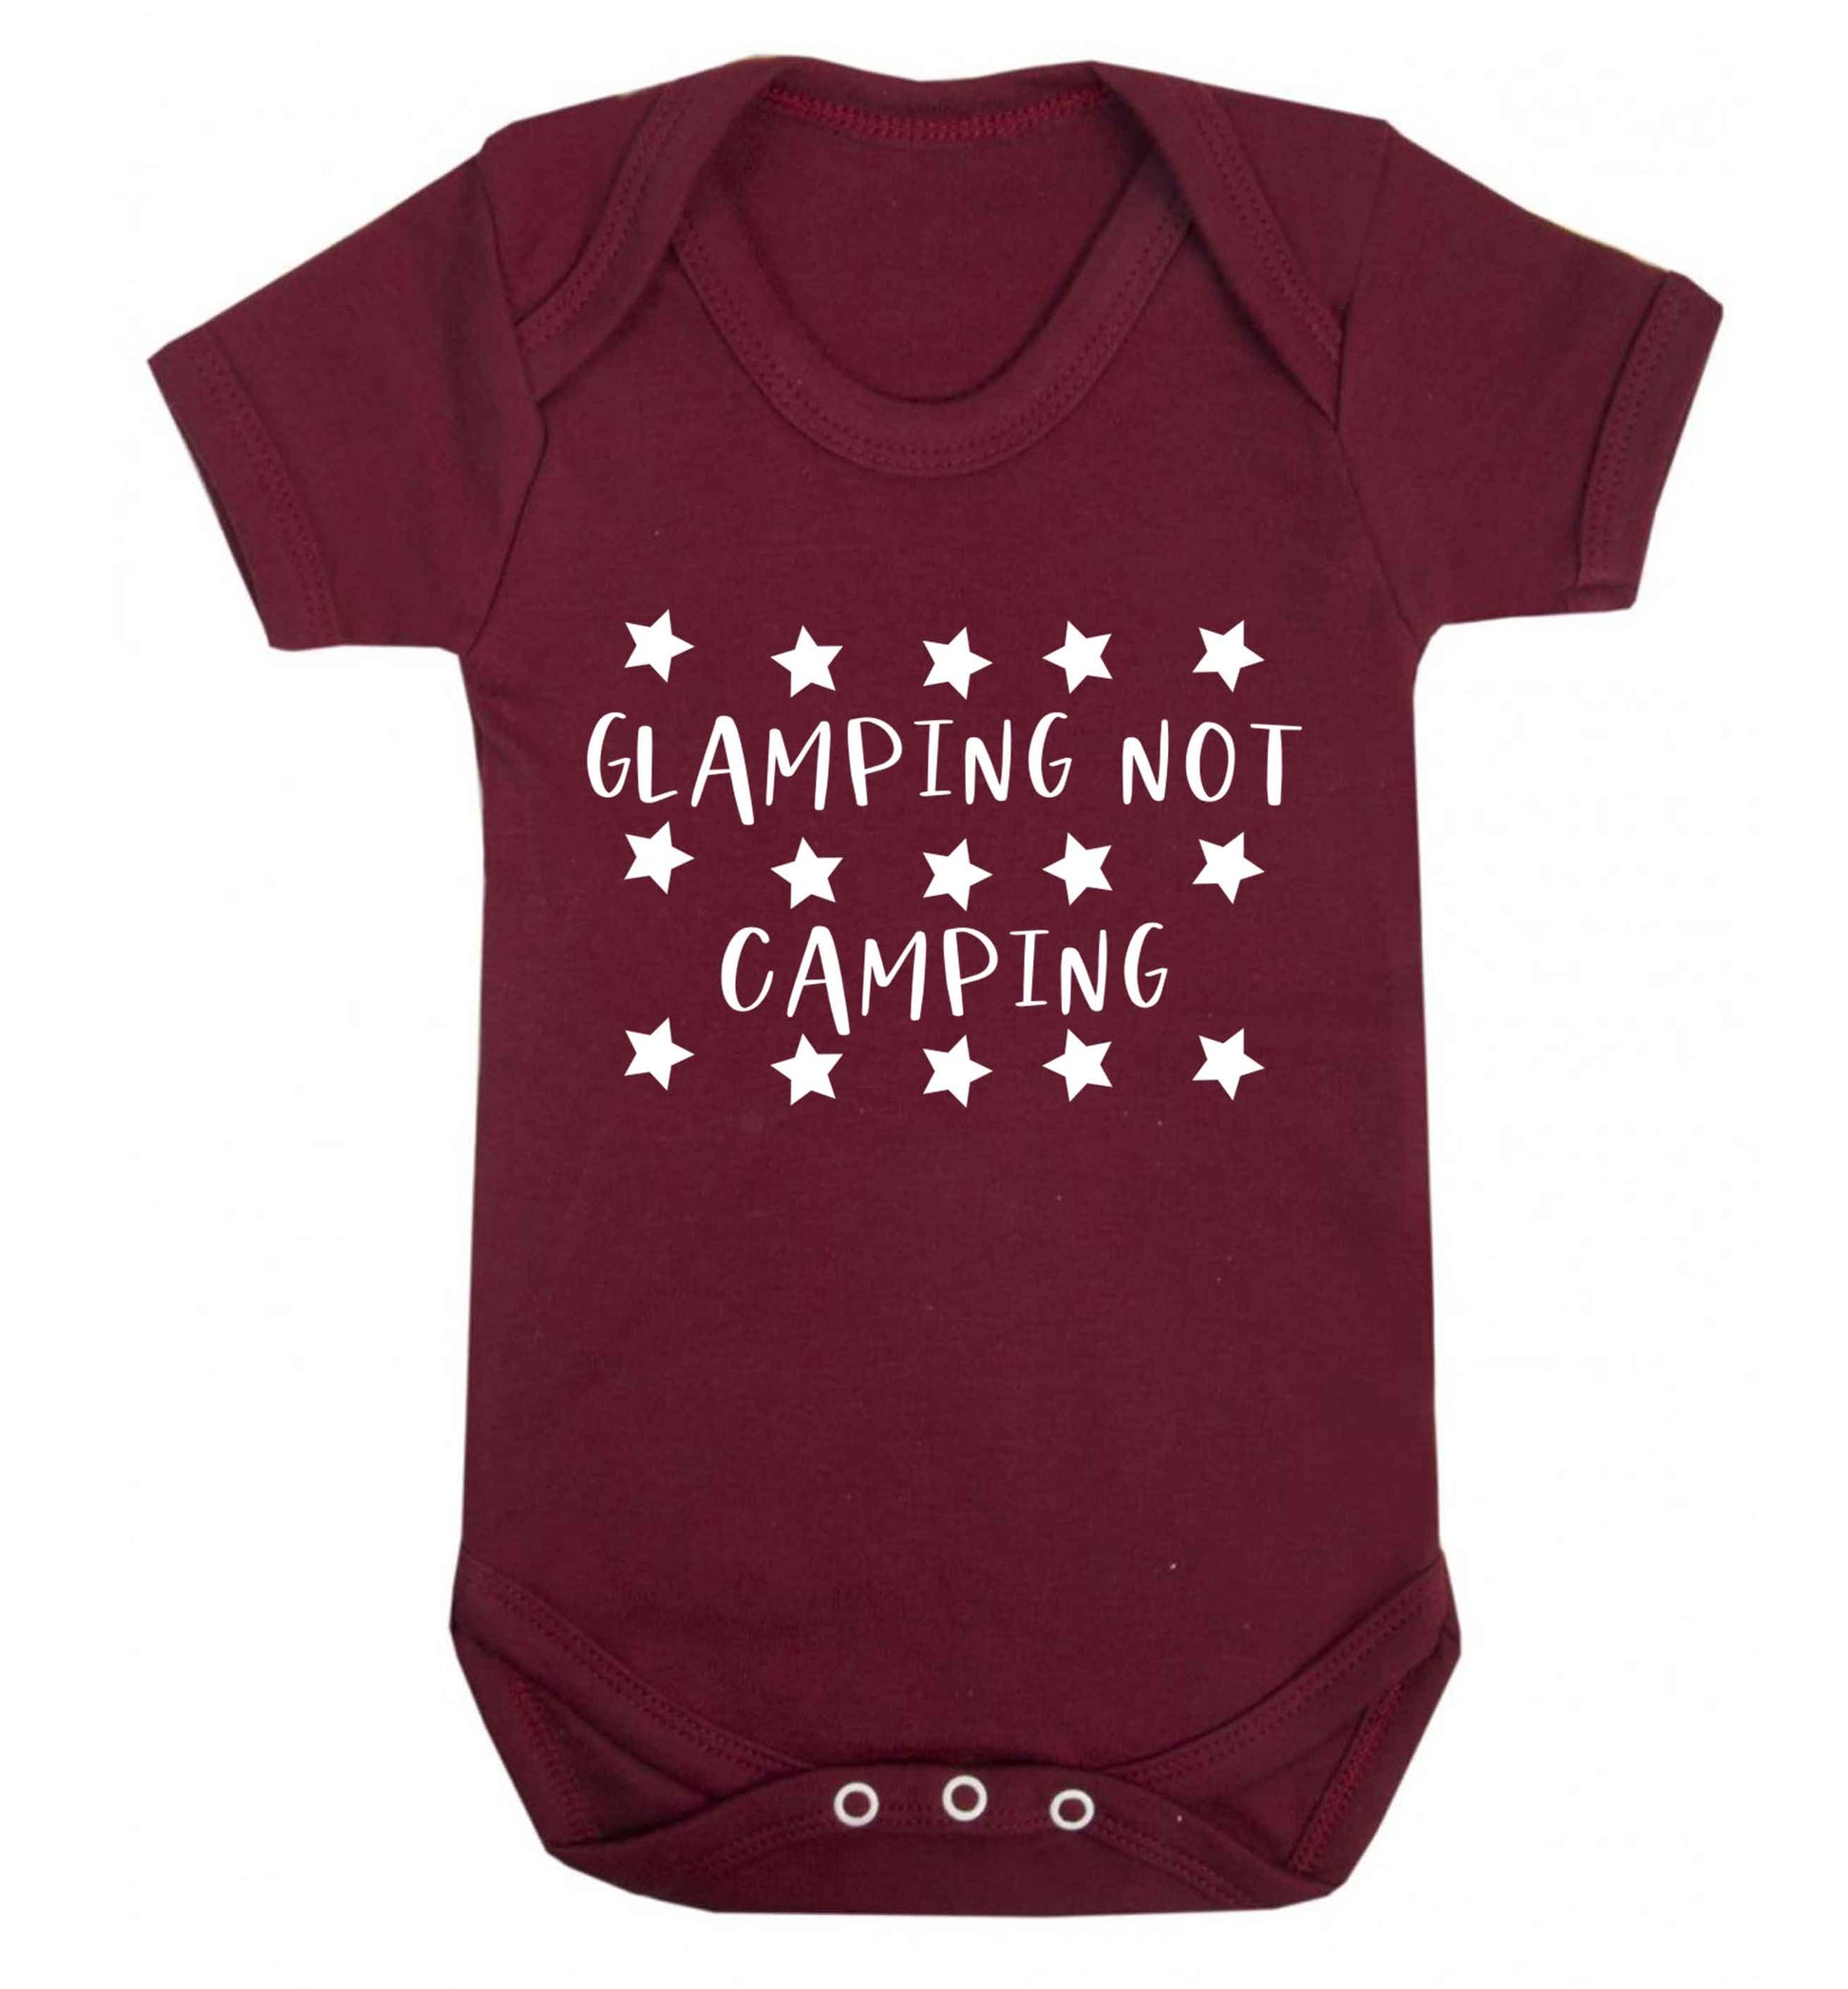 Glamping not camping Baby Vest maroon 18-24 months